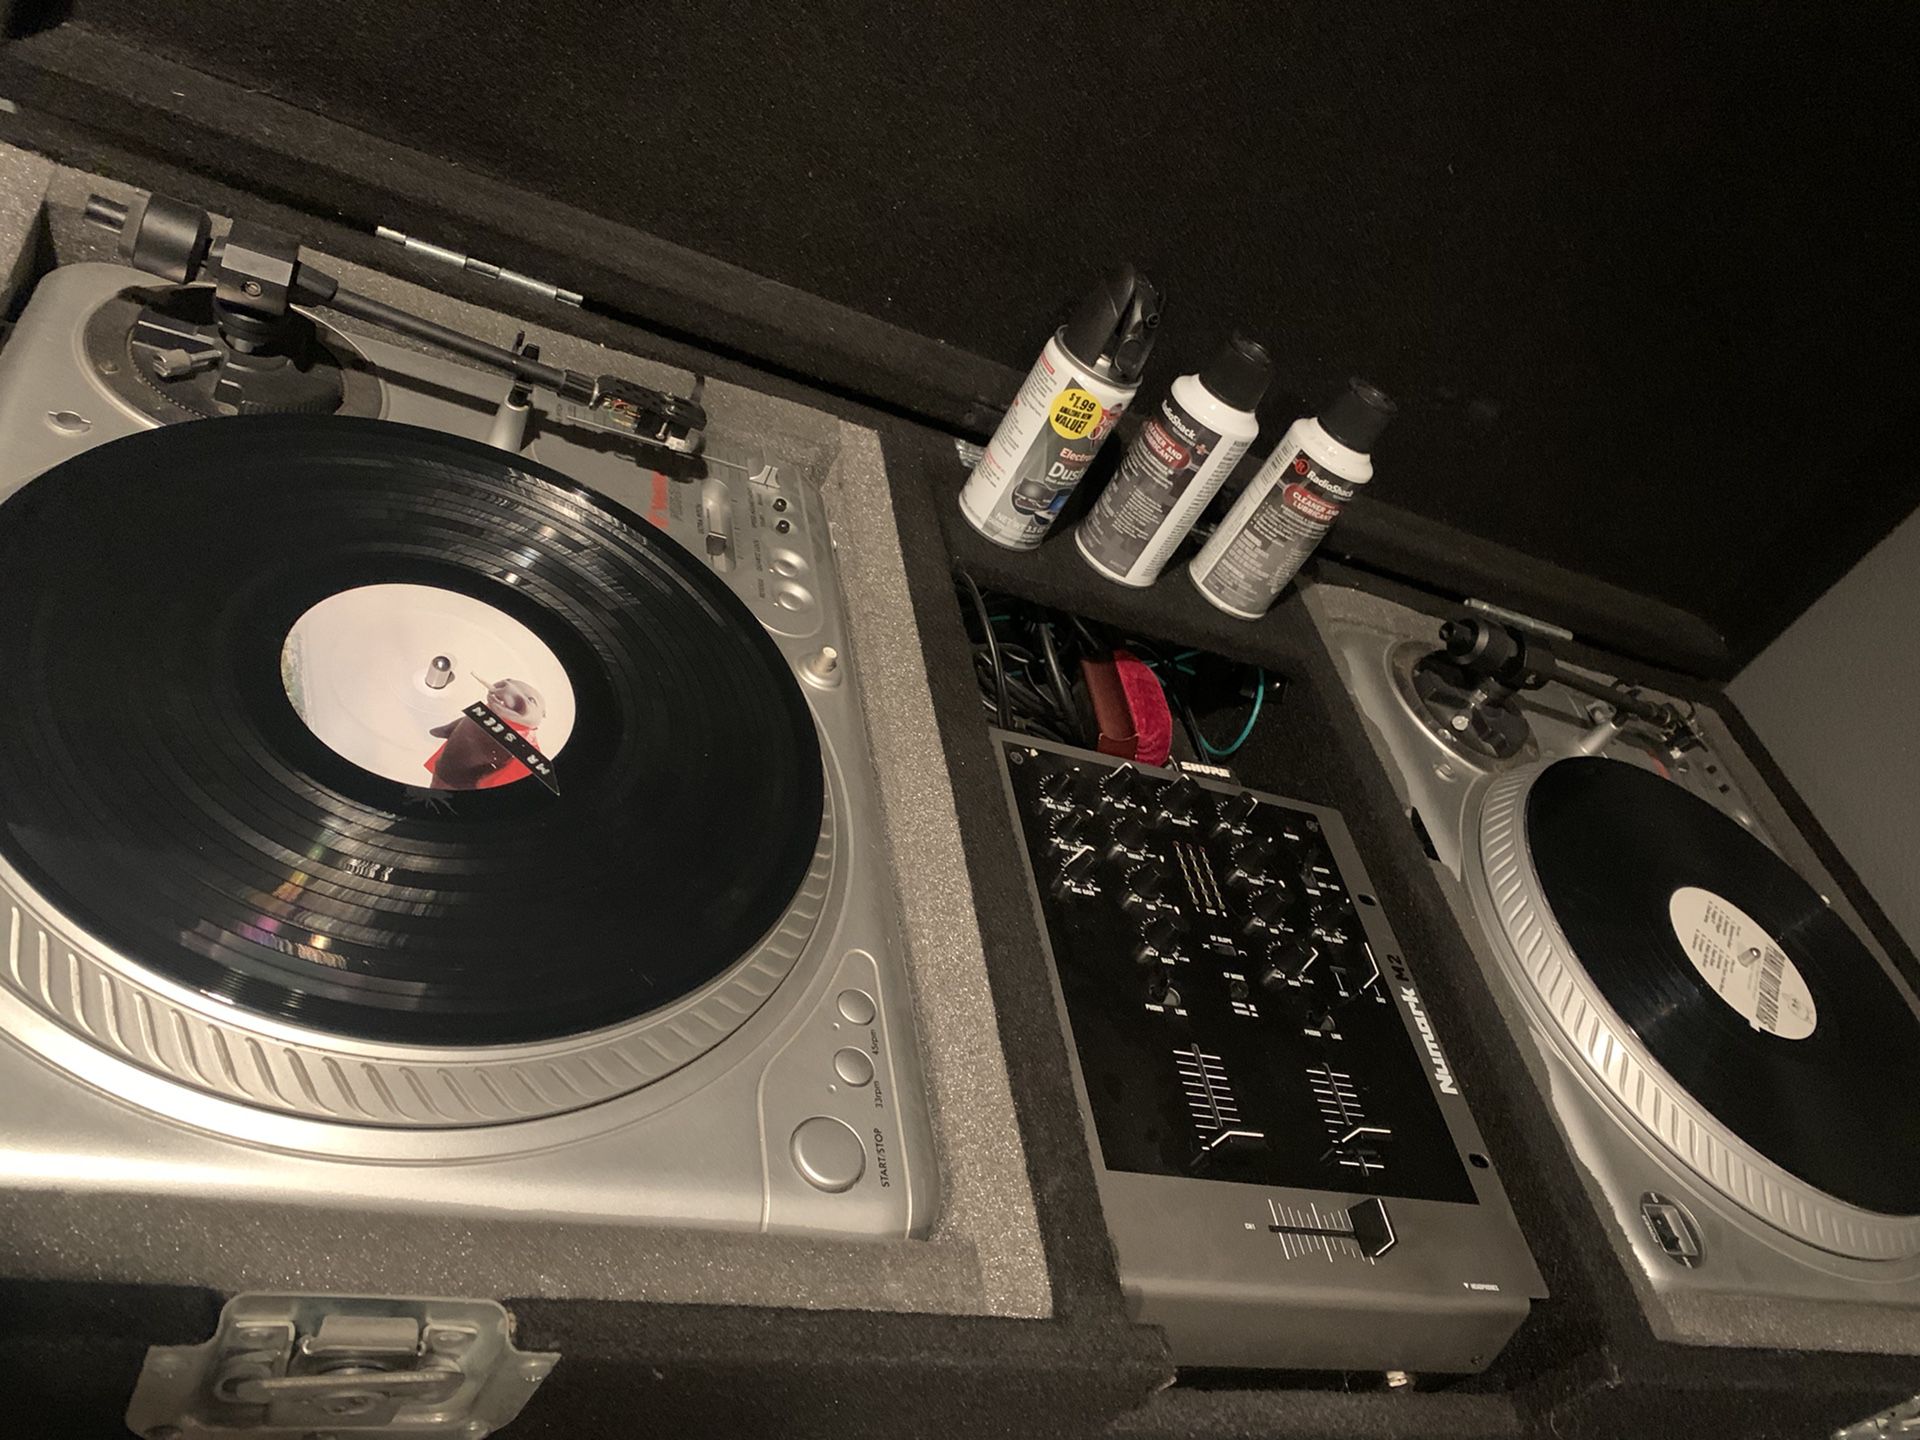 Vestax PDX 2000 pair with coffin, stand, rugs, and 80 break records